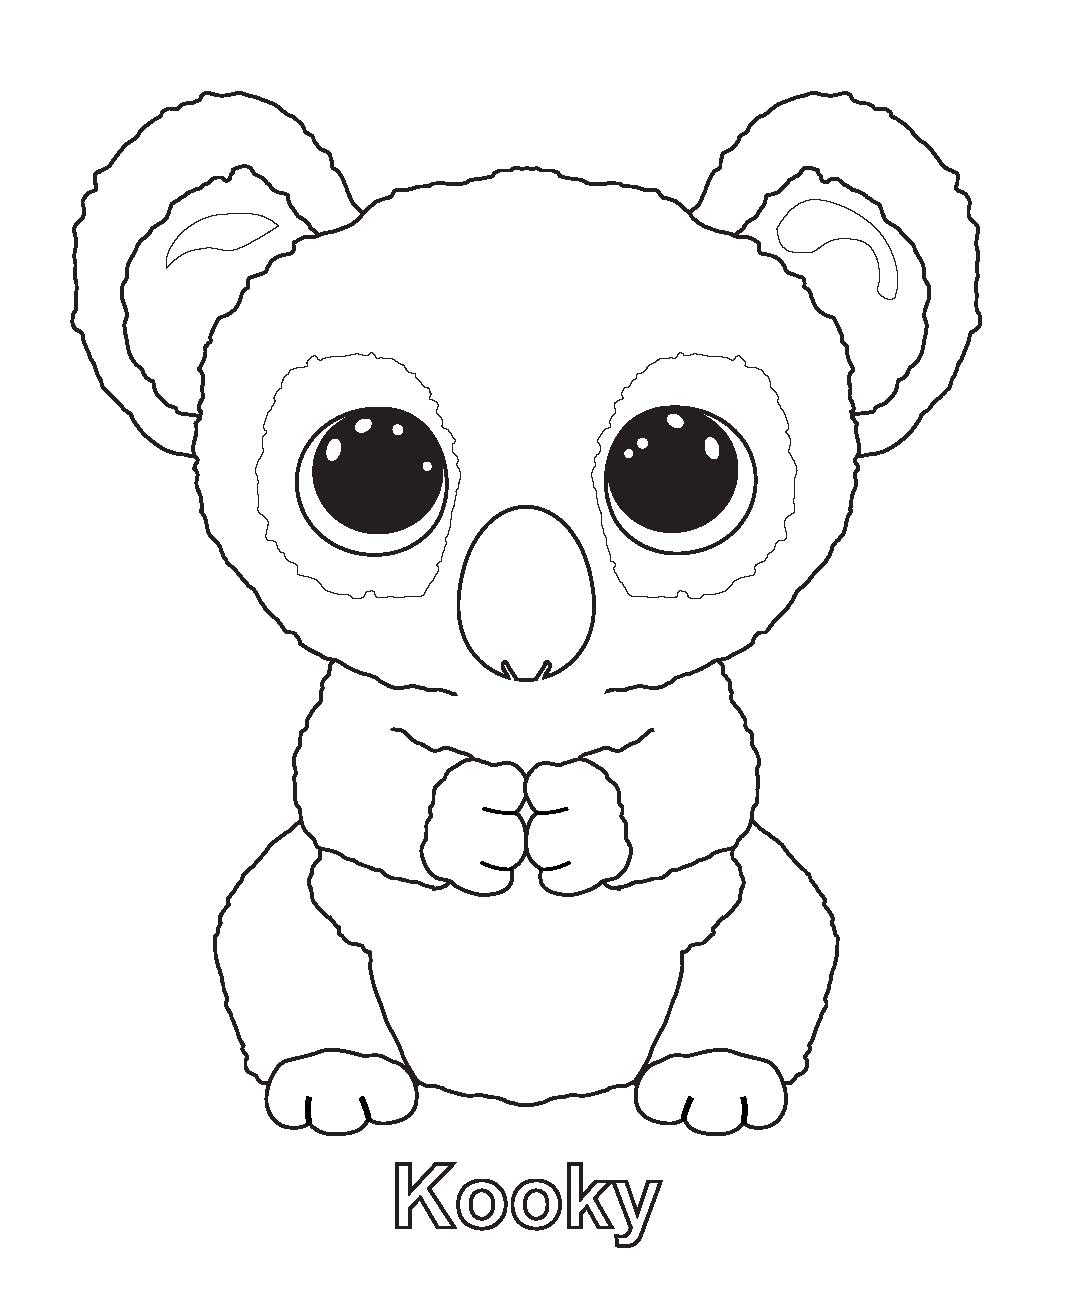 Kooky - Beanie Boo Coloring Pages